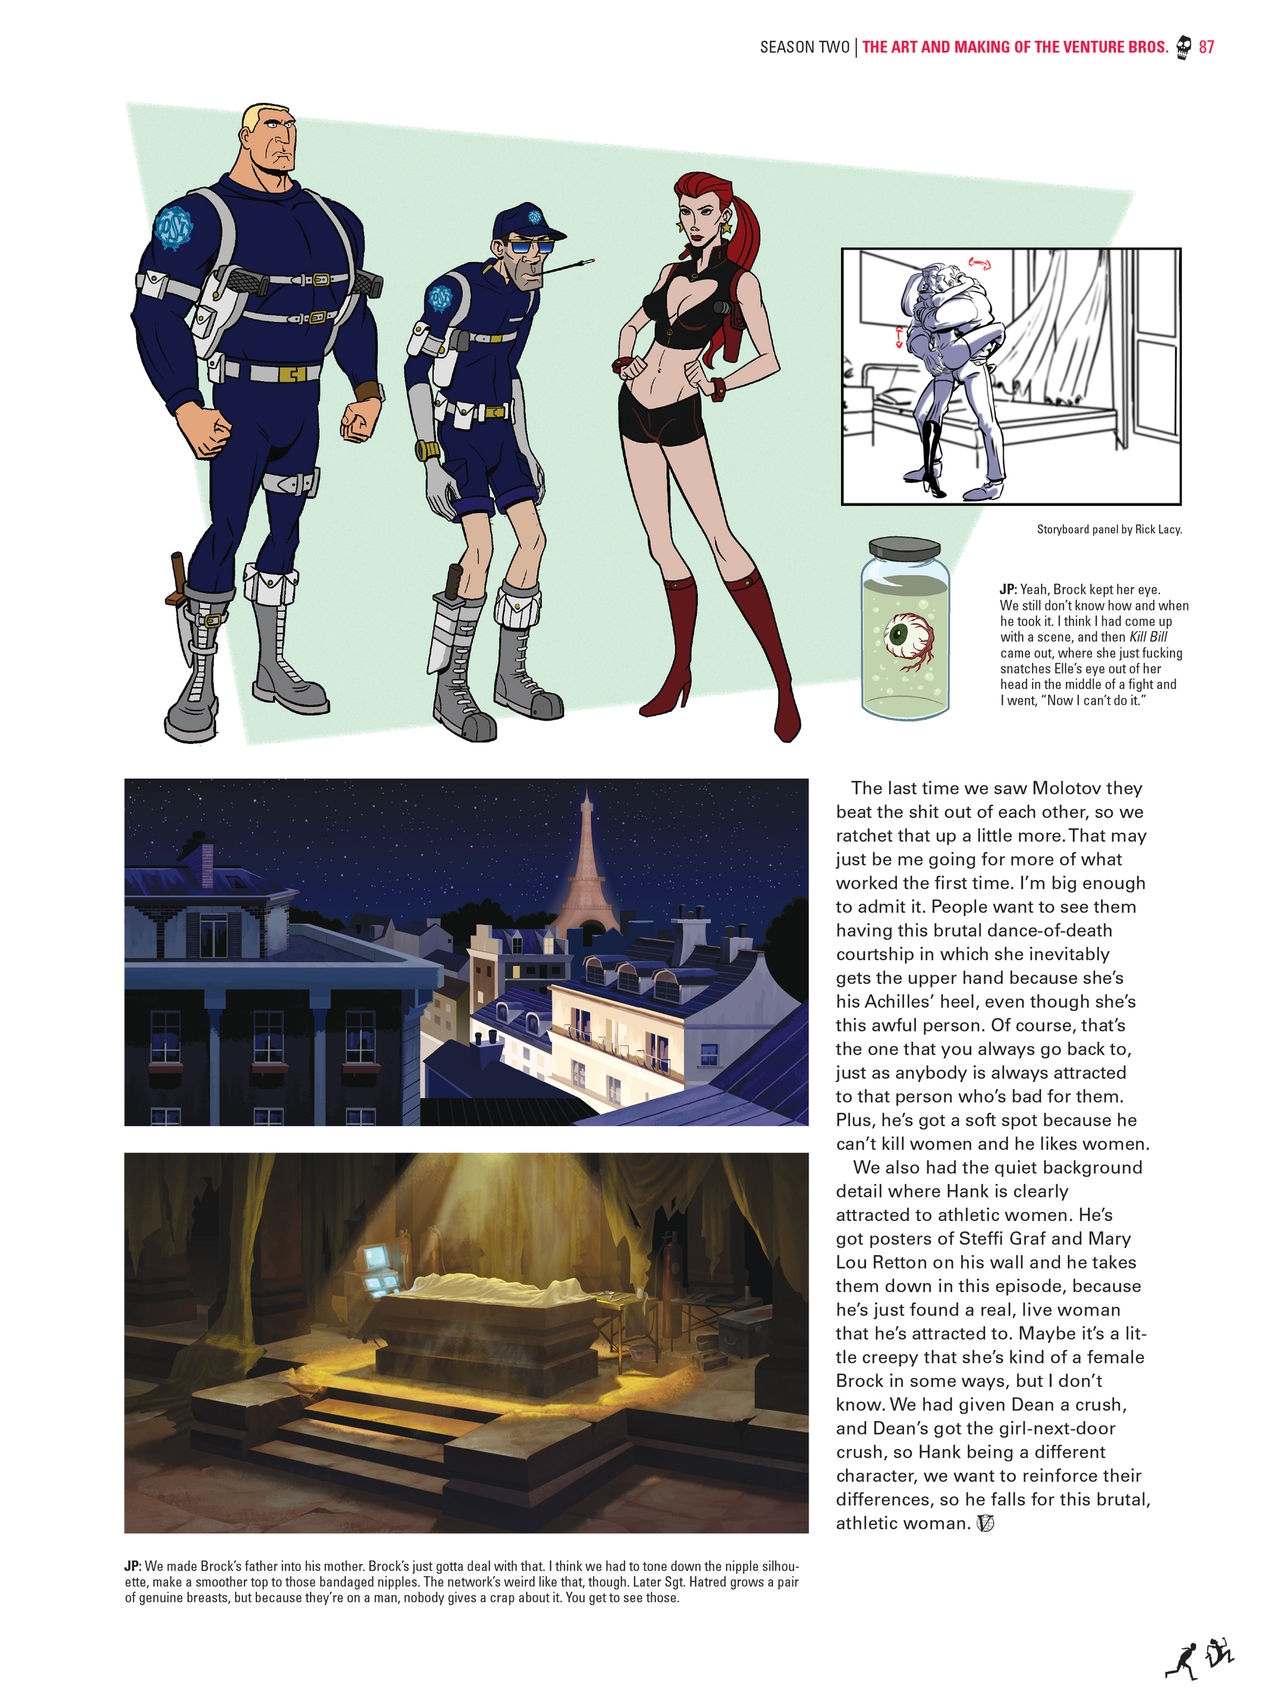 Go Team Venture! - The Art and Making of the Venture Bros 86